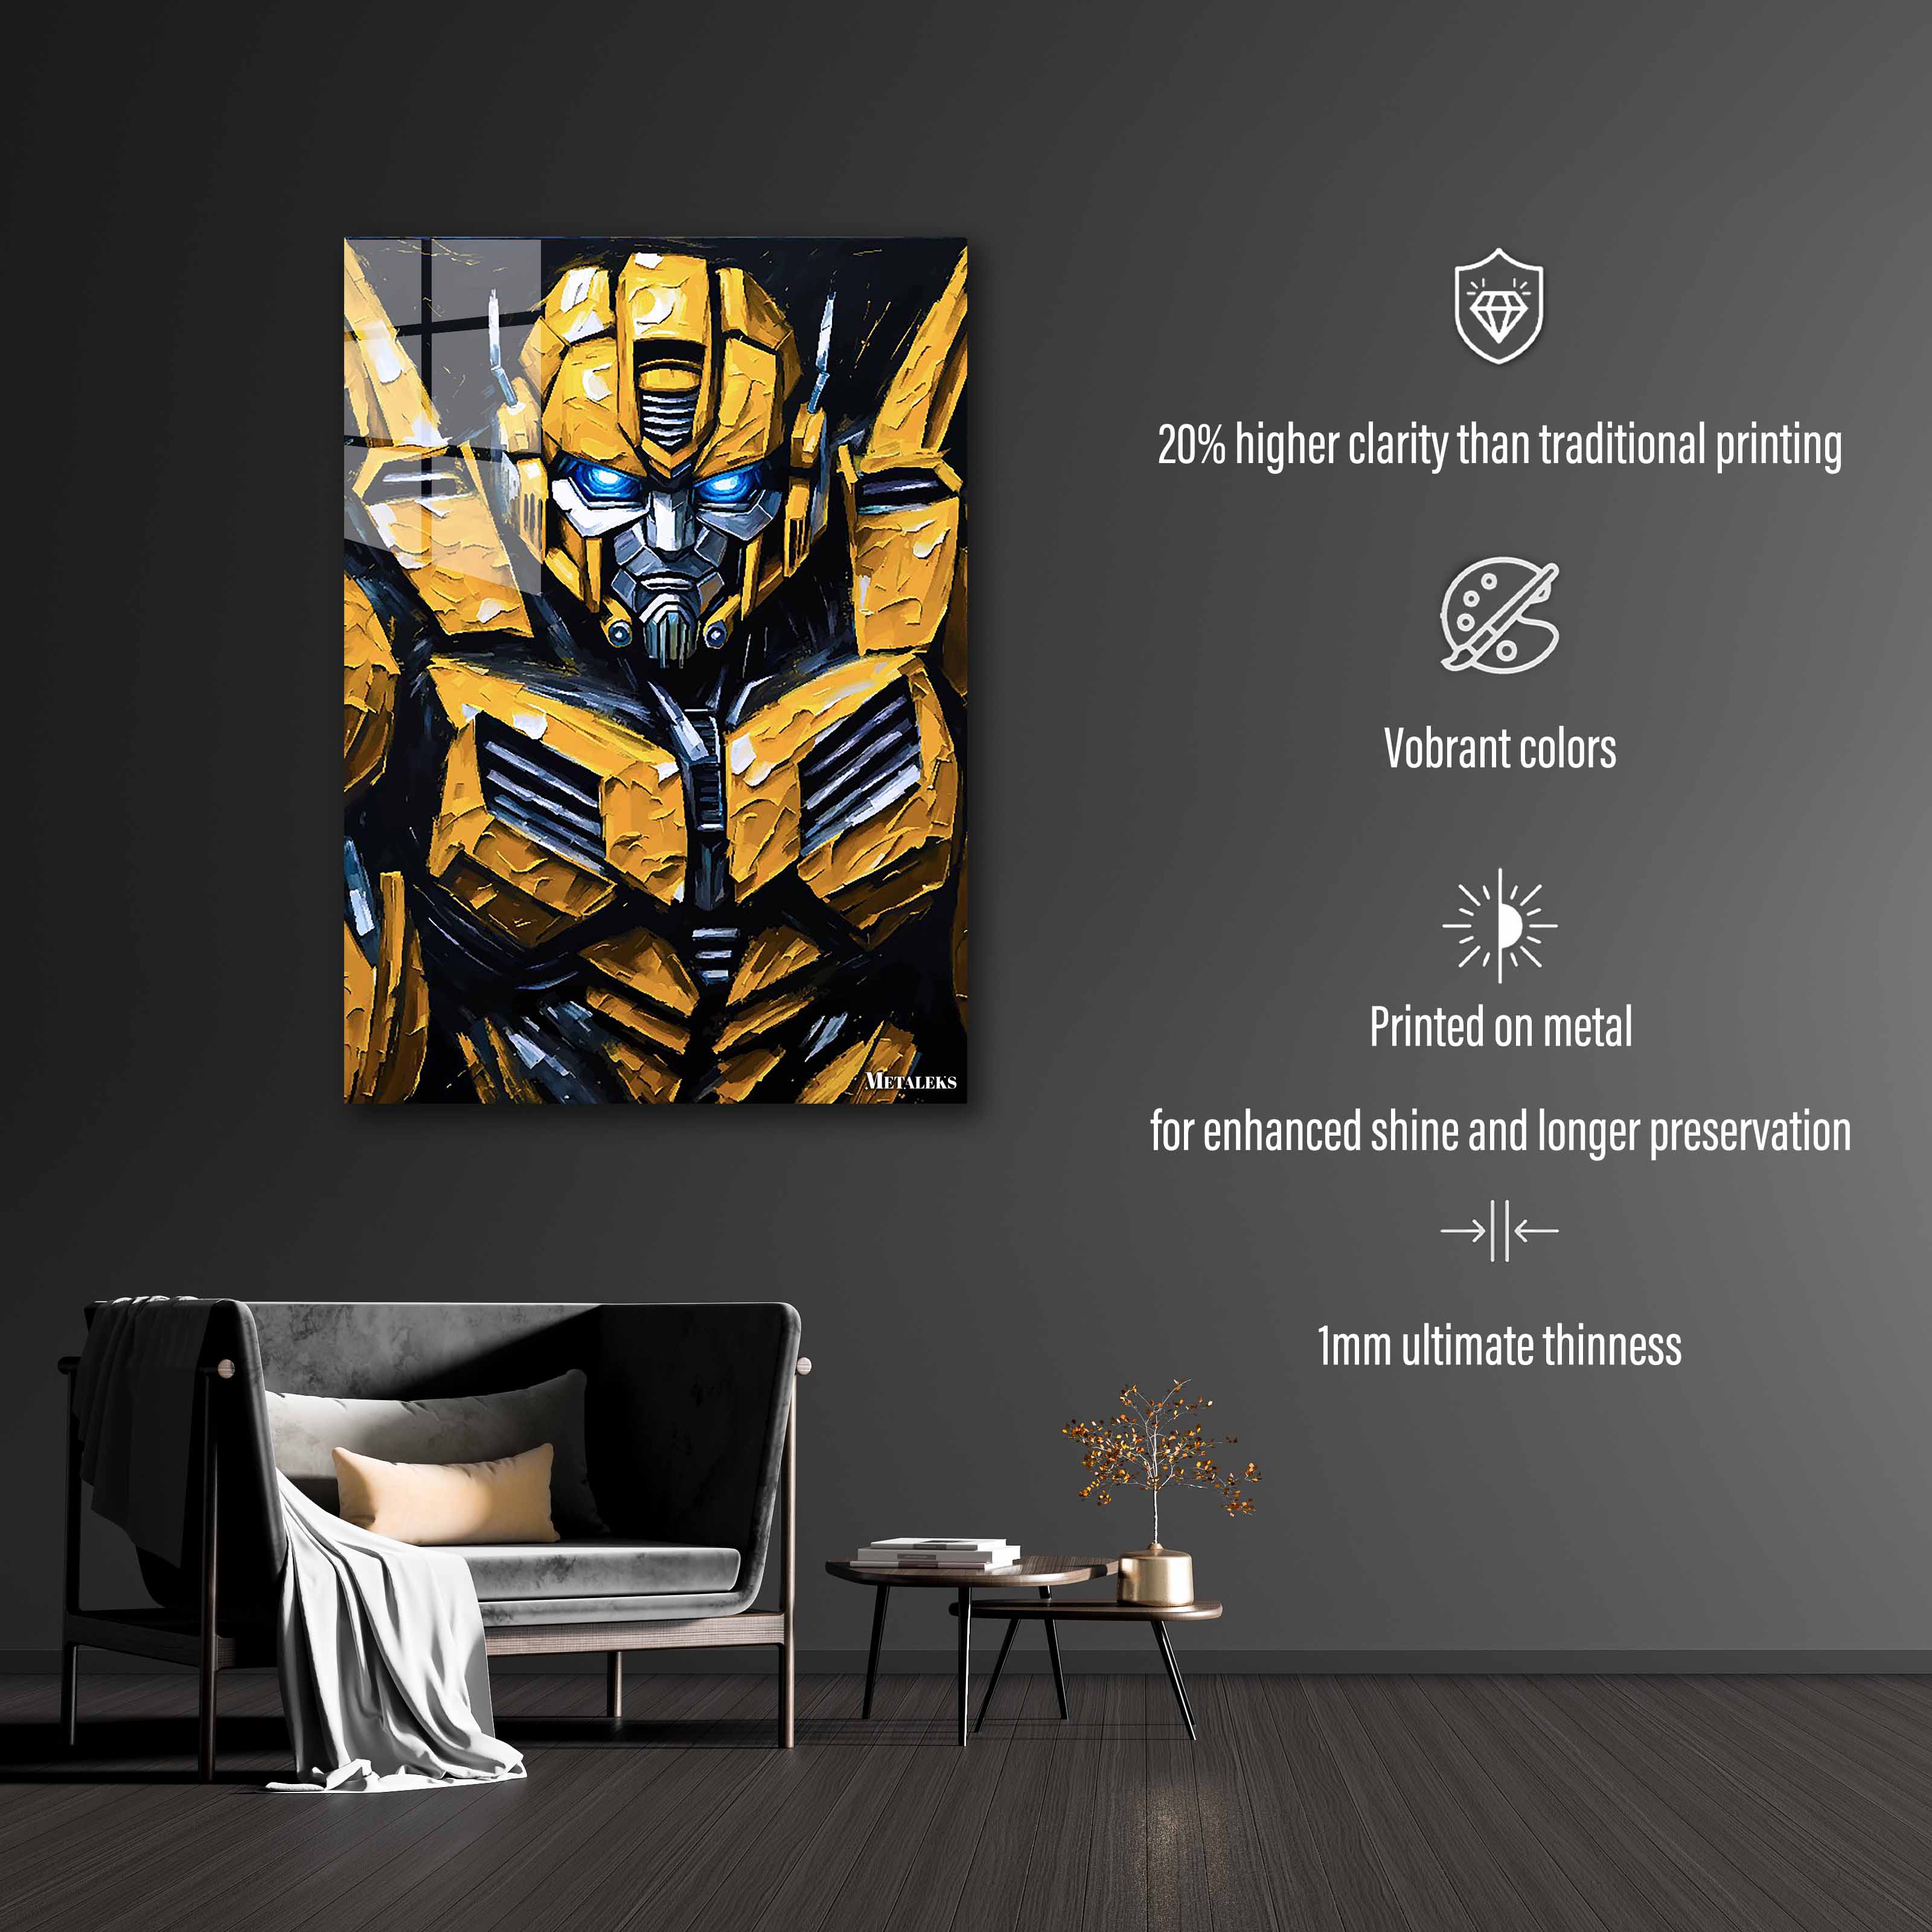 Bumblebee 2-designed by @ALTAY